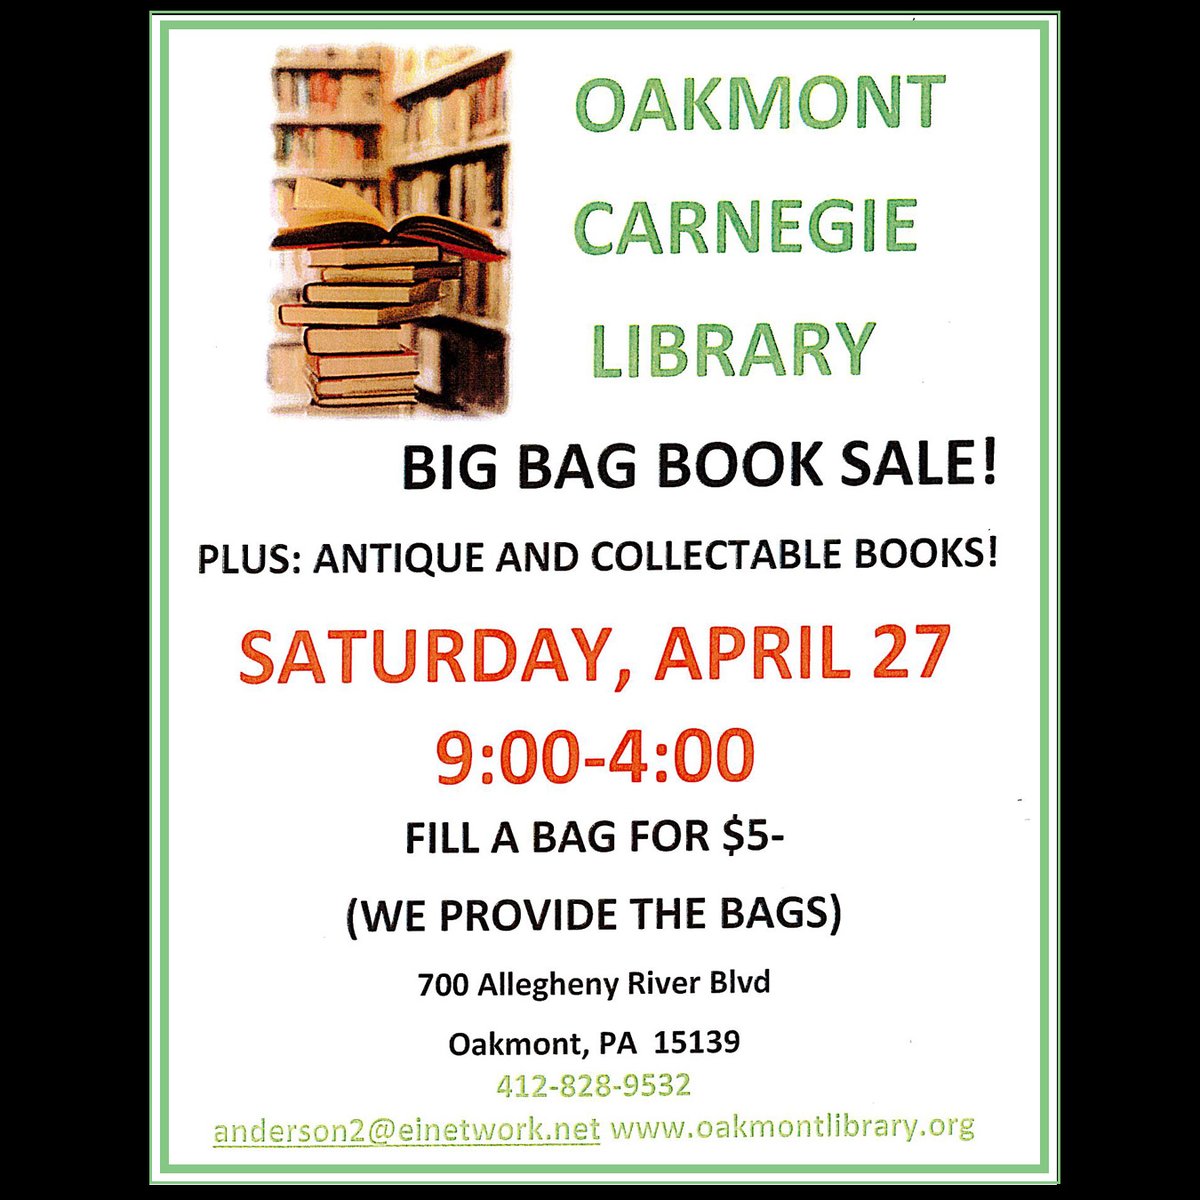 Big Bag Book Sale
Saturday, April 27, 2024, 9:00am - 4:00pm 
Join us at the library for our twice annual Big Bag Booksale in the Squirrel's Nest!

Fill a bag for only $5 - bags will be provided.  

Come check out what we have to offer.  All proceeds benefit the Oakmont Library.